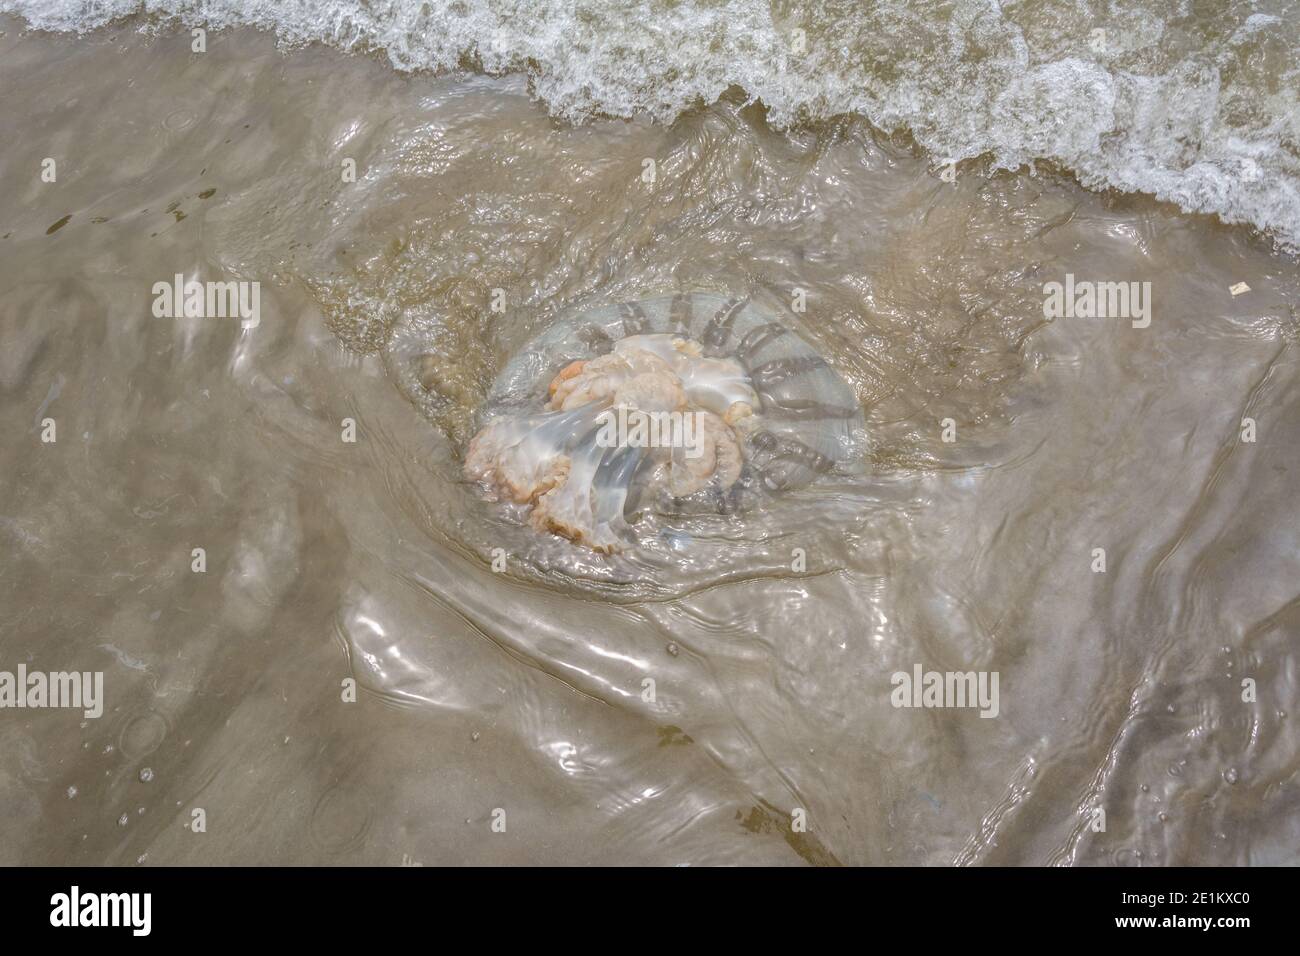 Jelly fish swimming in the sea at beach Stock Photo